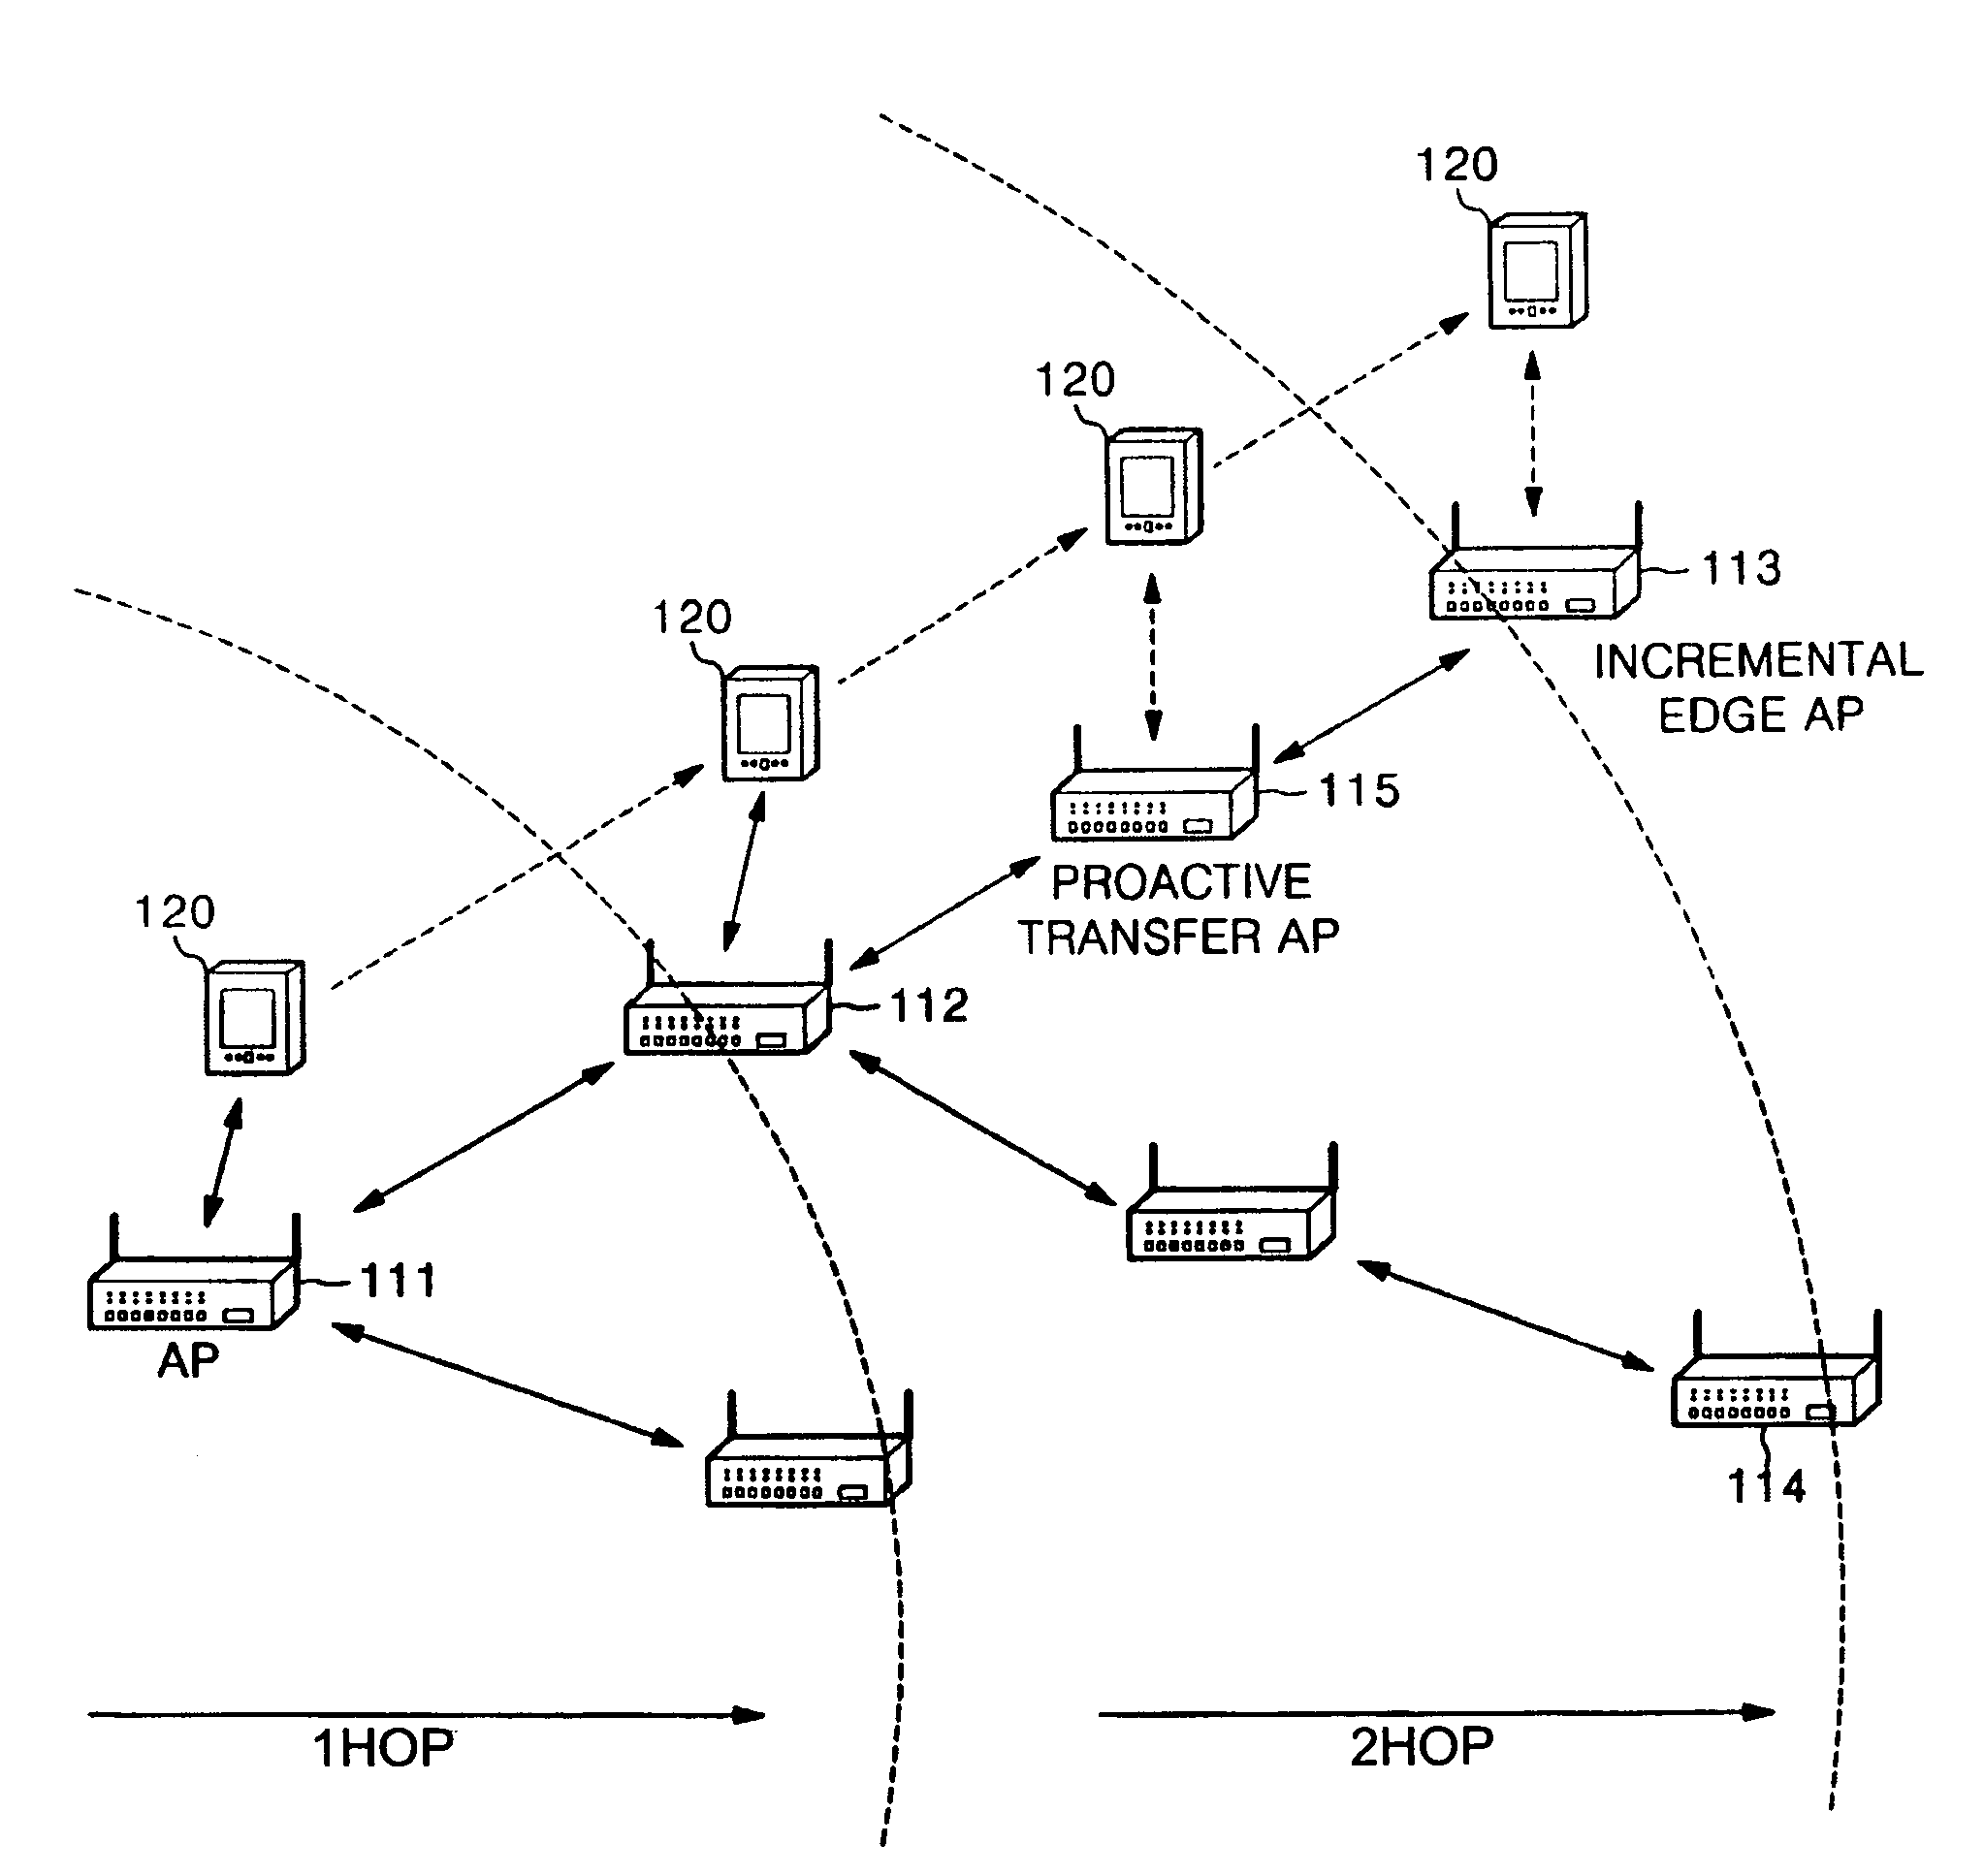 Transferring context during hand-over of mobile node in a wireless network